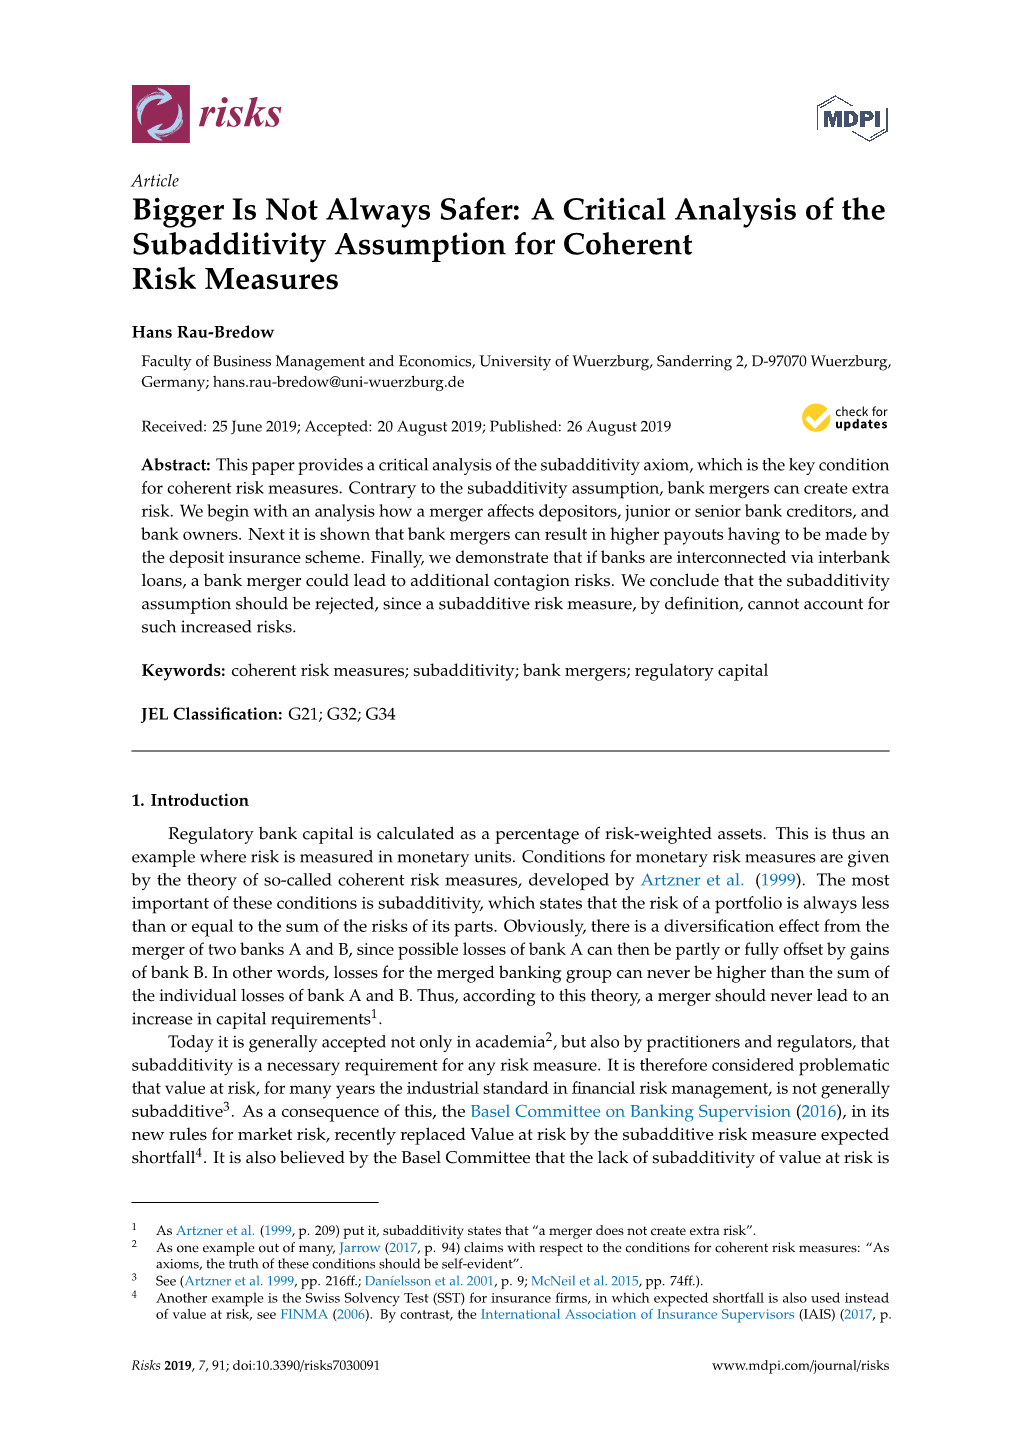 Bigger Is Not Always Safer: a Critical Analysis of the Subadditivity Assumption for Coherent Risk Measures